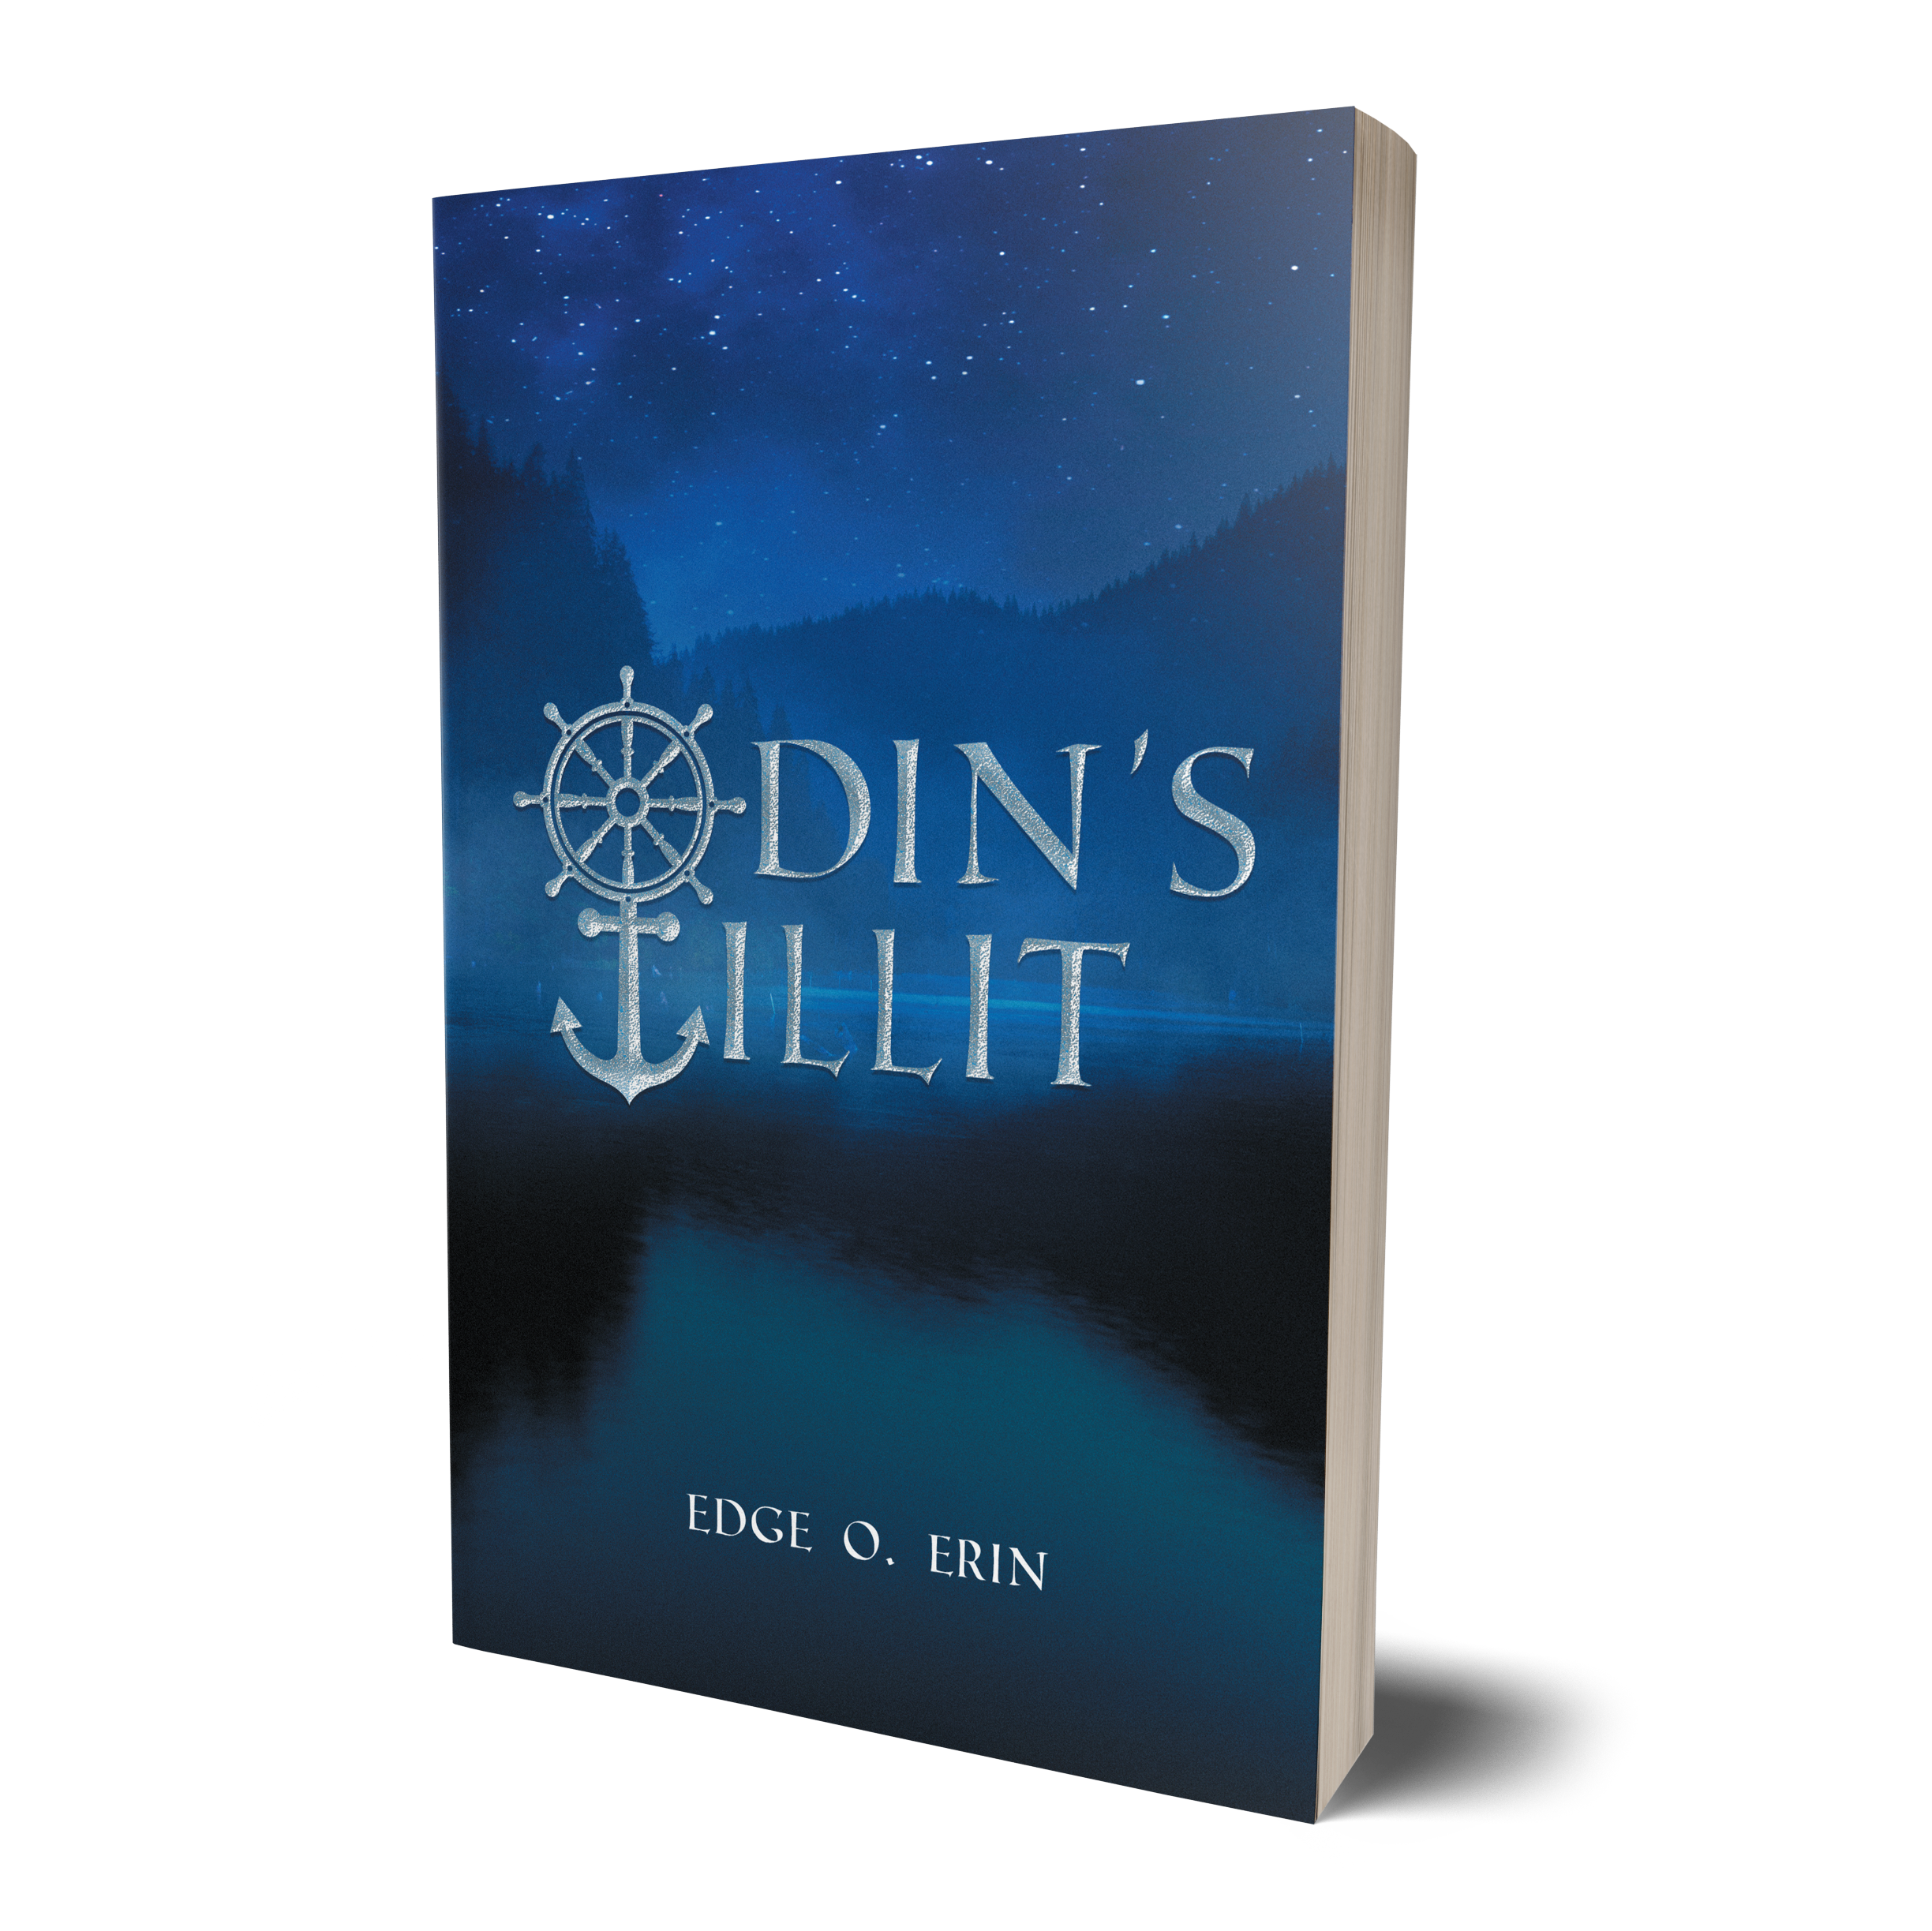 Front cover of the paperback and ebook version of Odin's Tillit